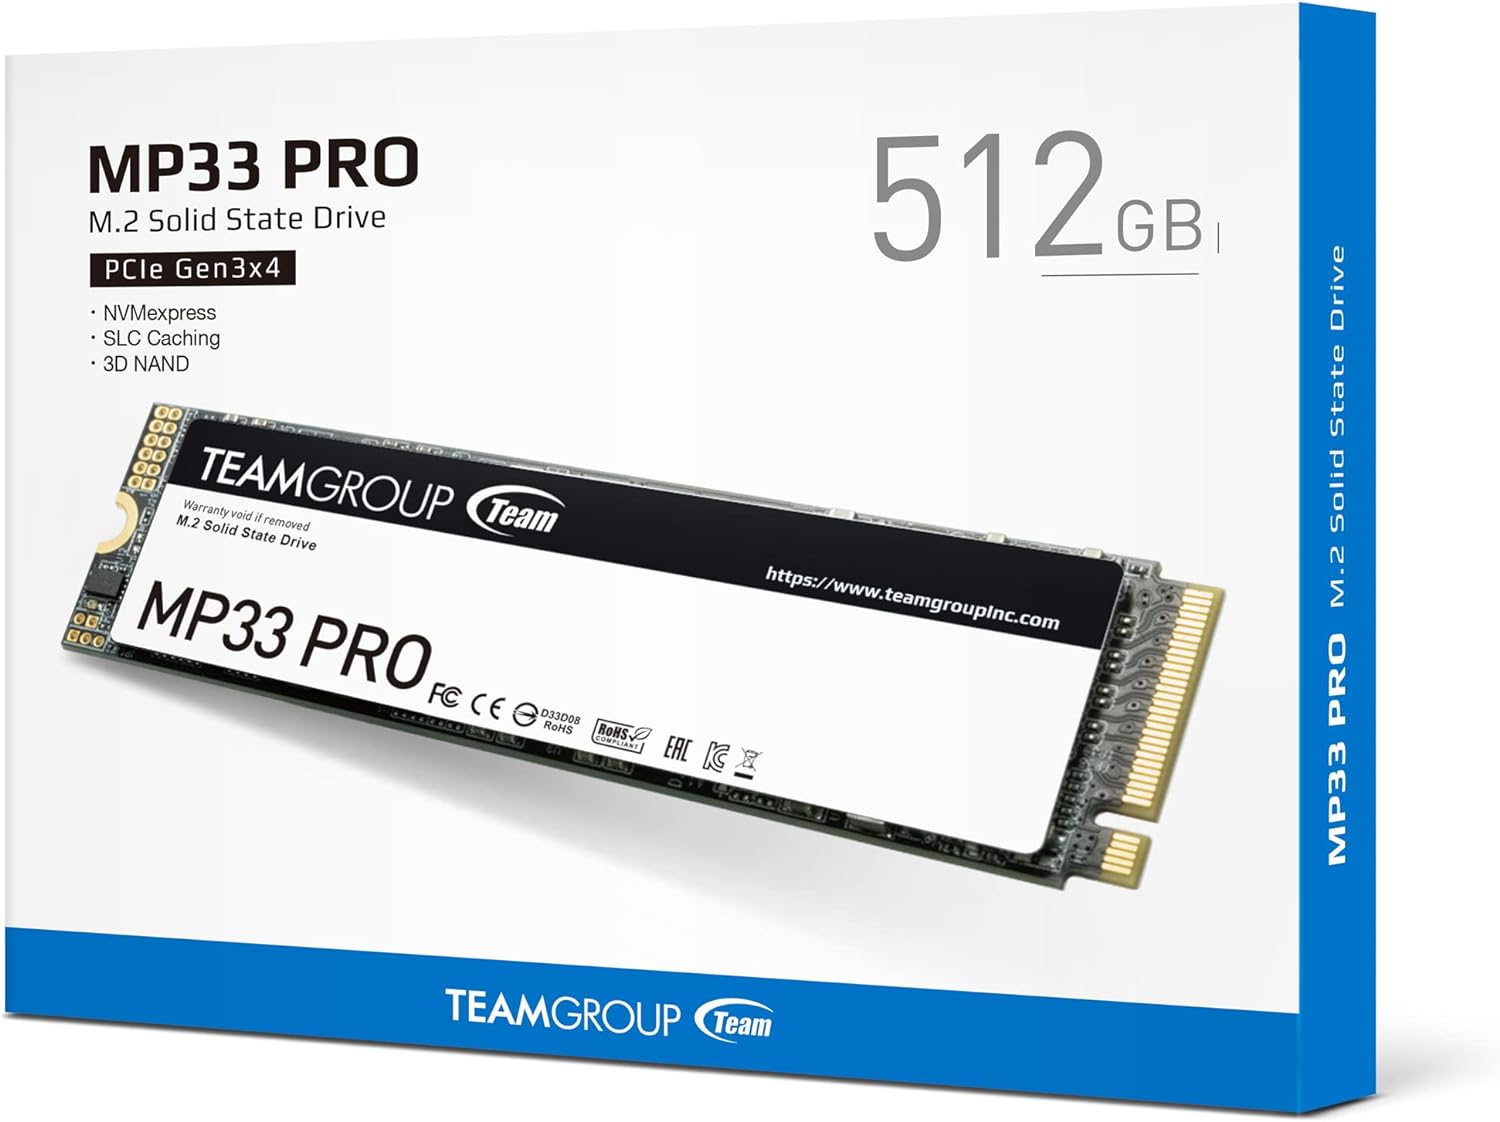 TEAMGROUP MP33 1TB SLC Cache 3D NAND TLC NVMe 1.3 PCIe Gen3x4 M.2 2280 Internal SSD Read/Write Speed up to 1800/1500 MB/s Compatible with Laptop  PC Desktop TM8FP6001T0C101